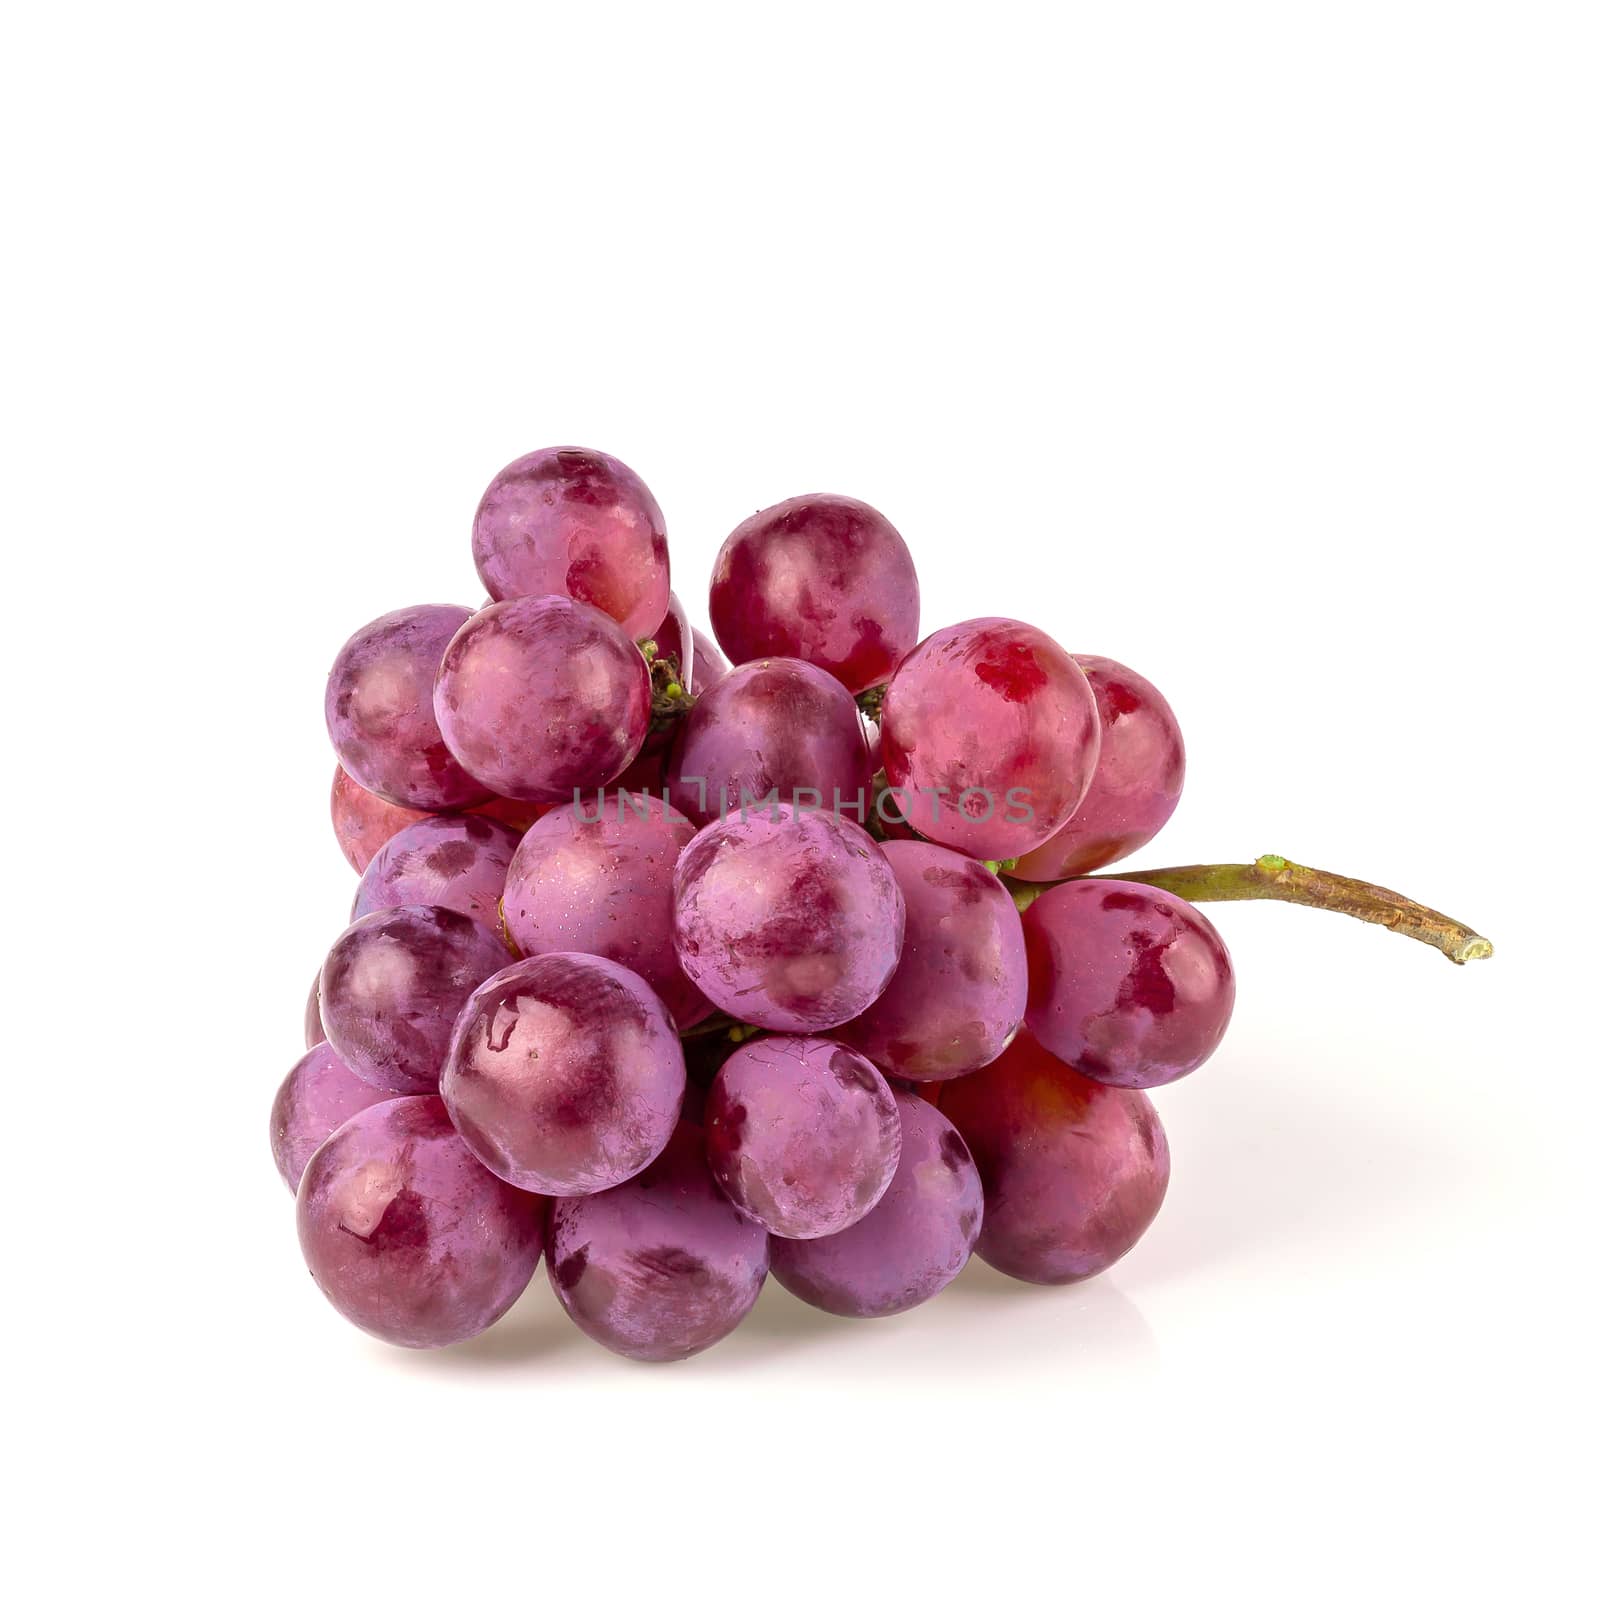 Red Grapes isolated on a white background by kaiskynet